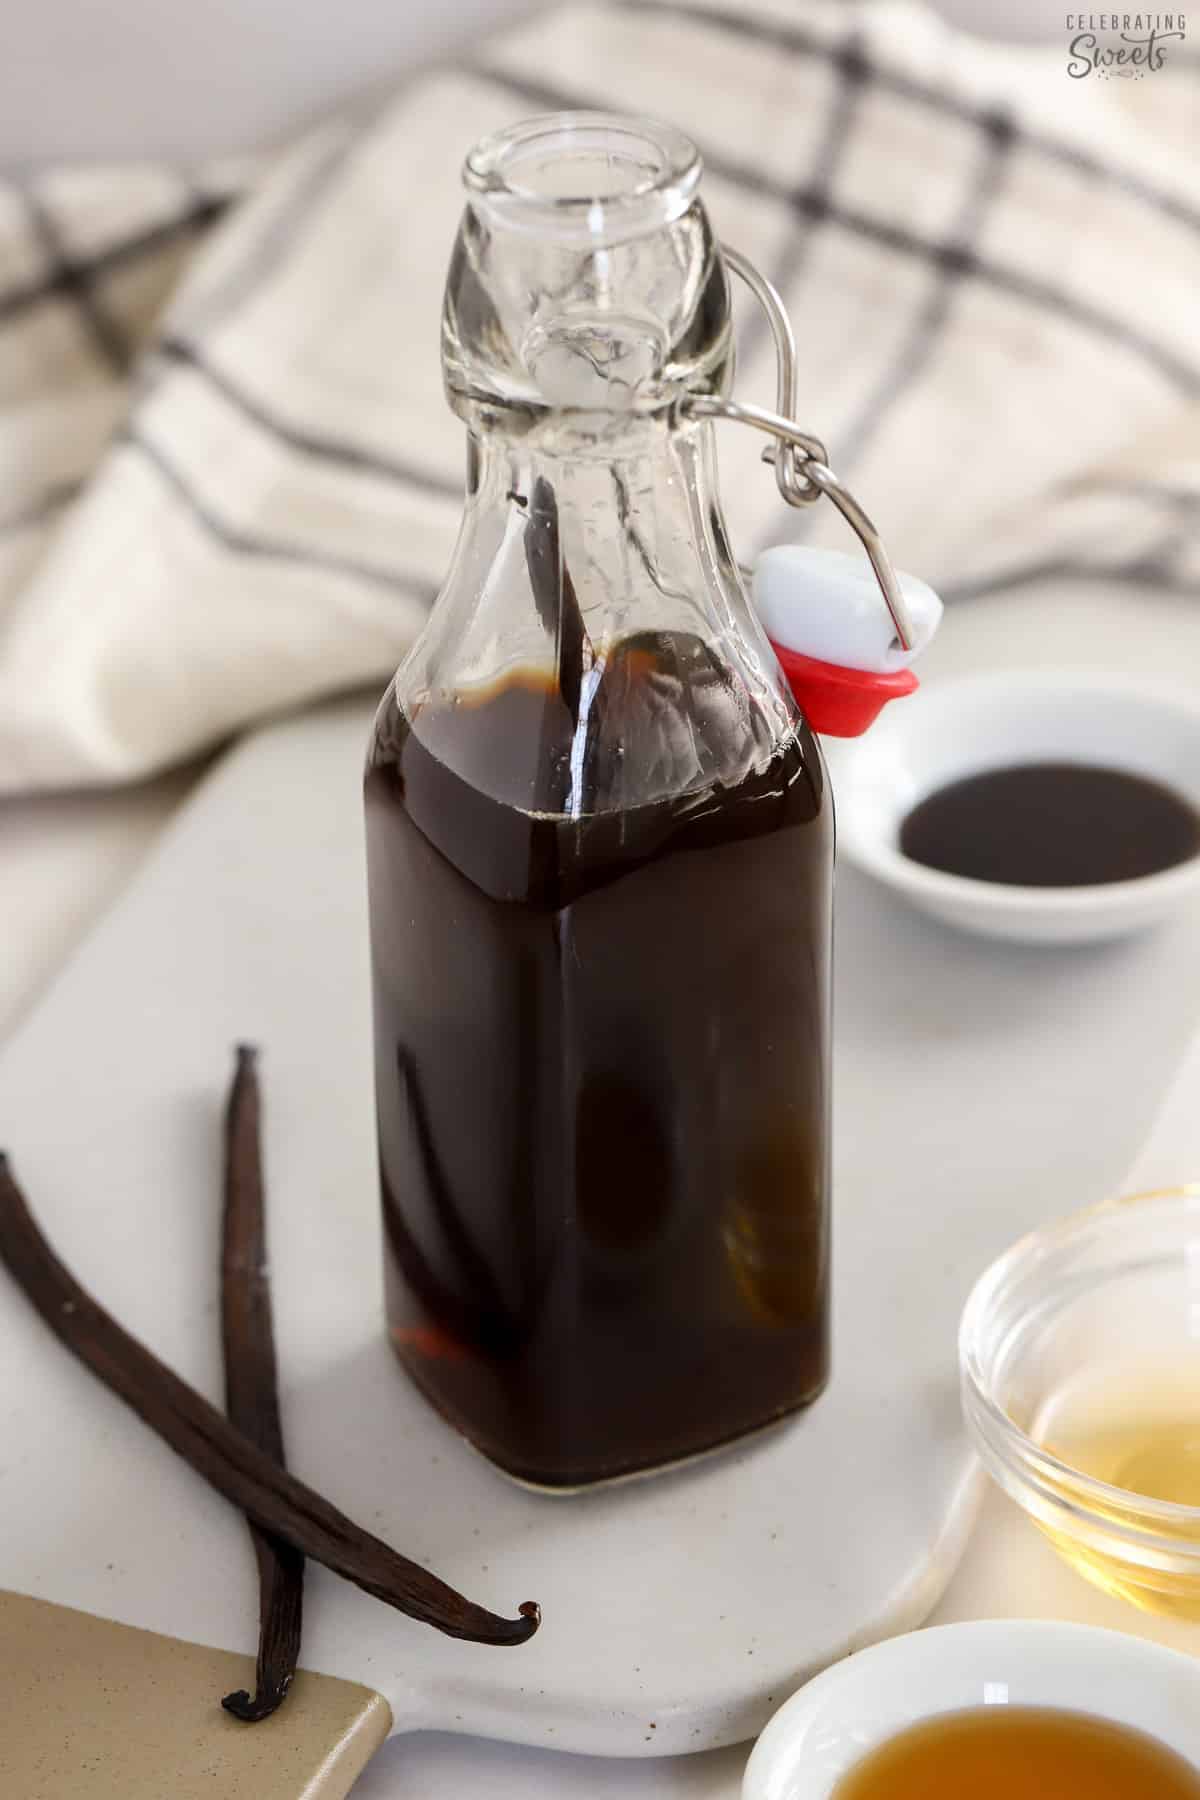 Vanilla extract in a glass container with vanilla beans next to it.